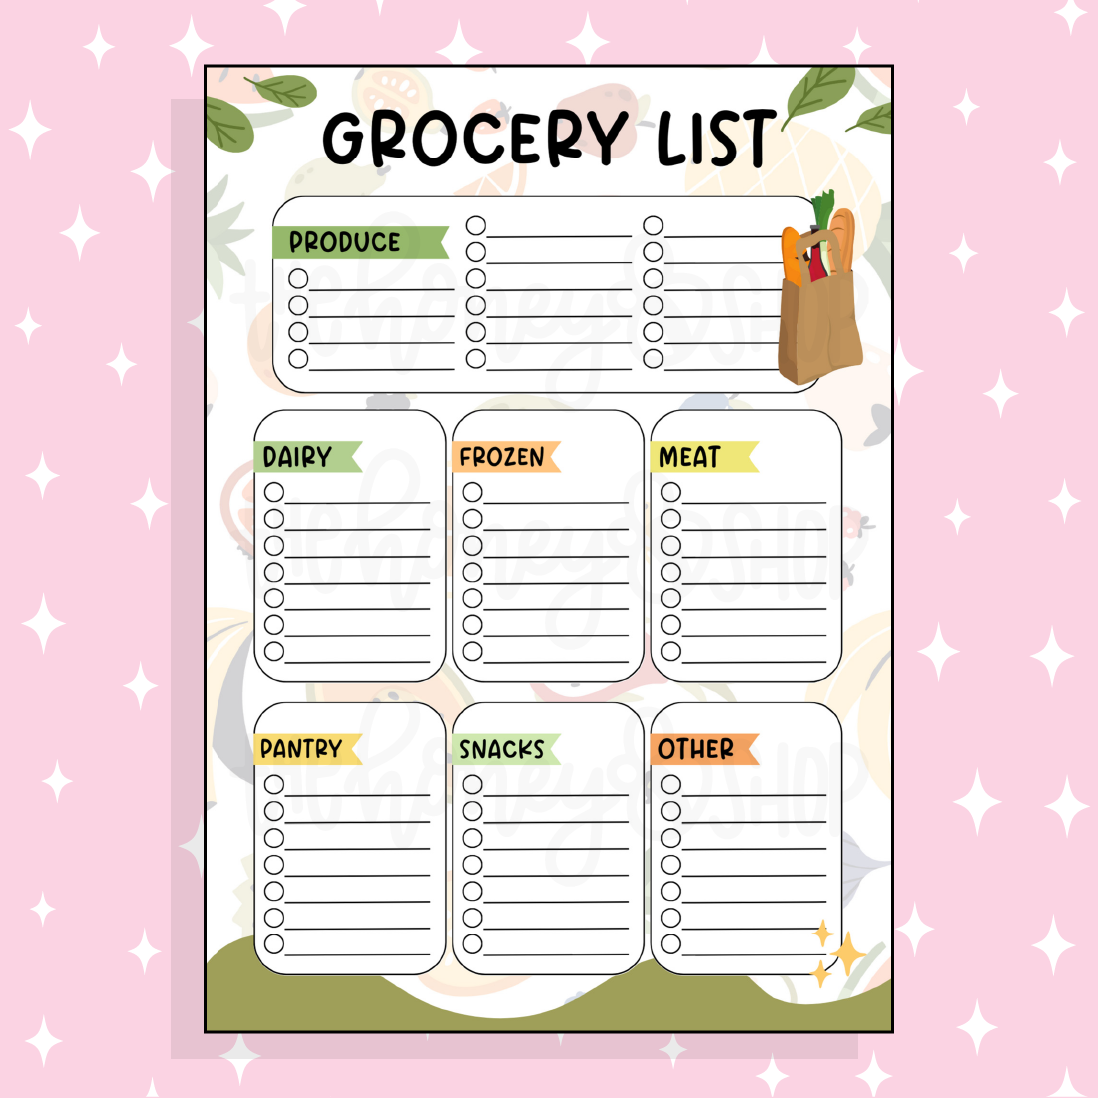 Grocery List Bee-6 Full Page Sticker | B6 Size 5x7 | Choose Your Color Option!